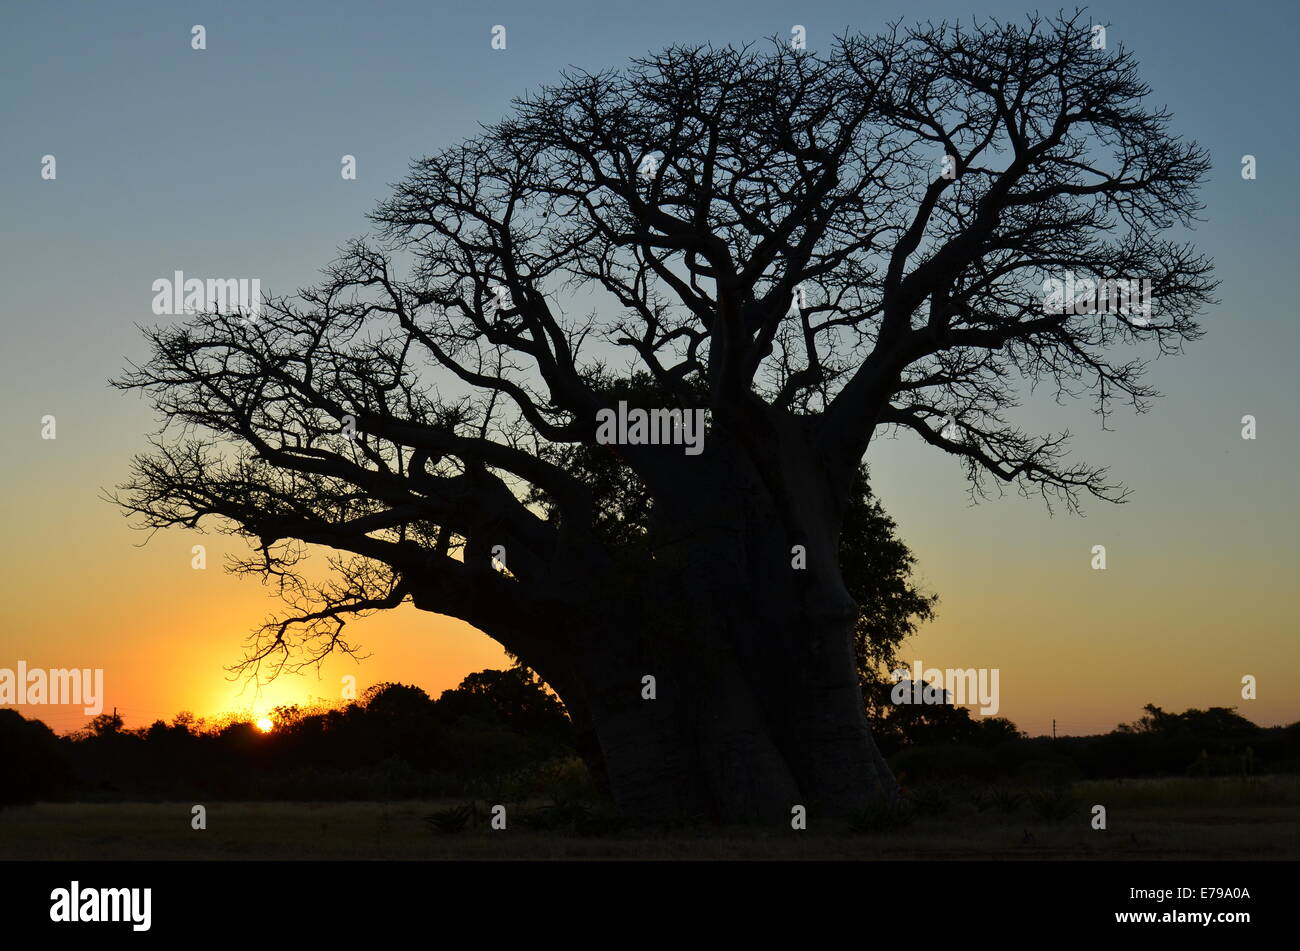 Baobab tree silhouetted against sunset, Limpopo, South Africa Stock Photo